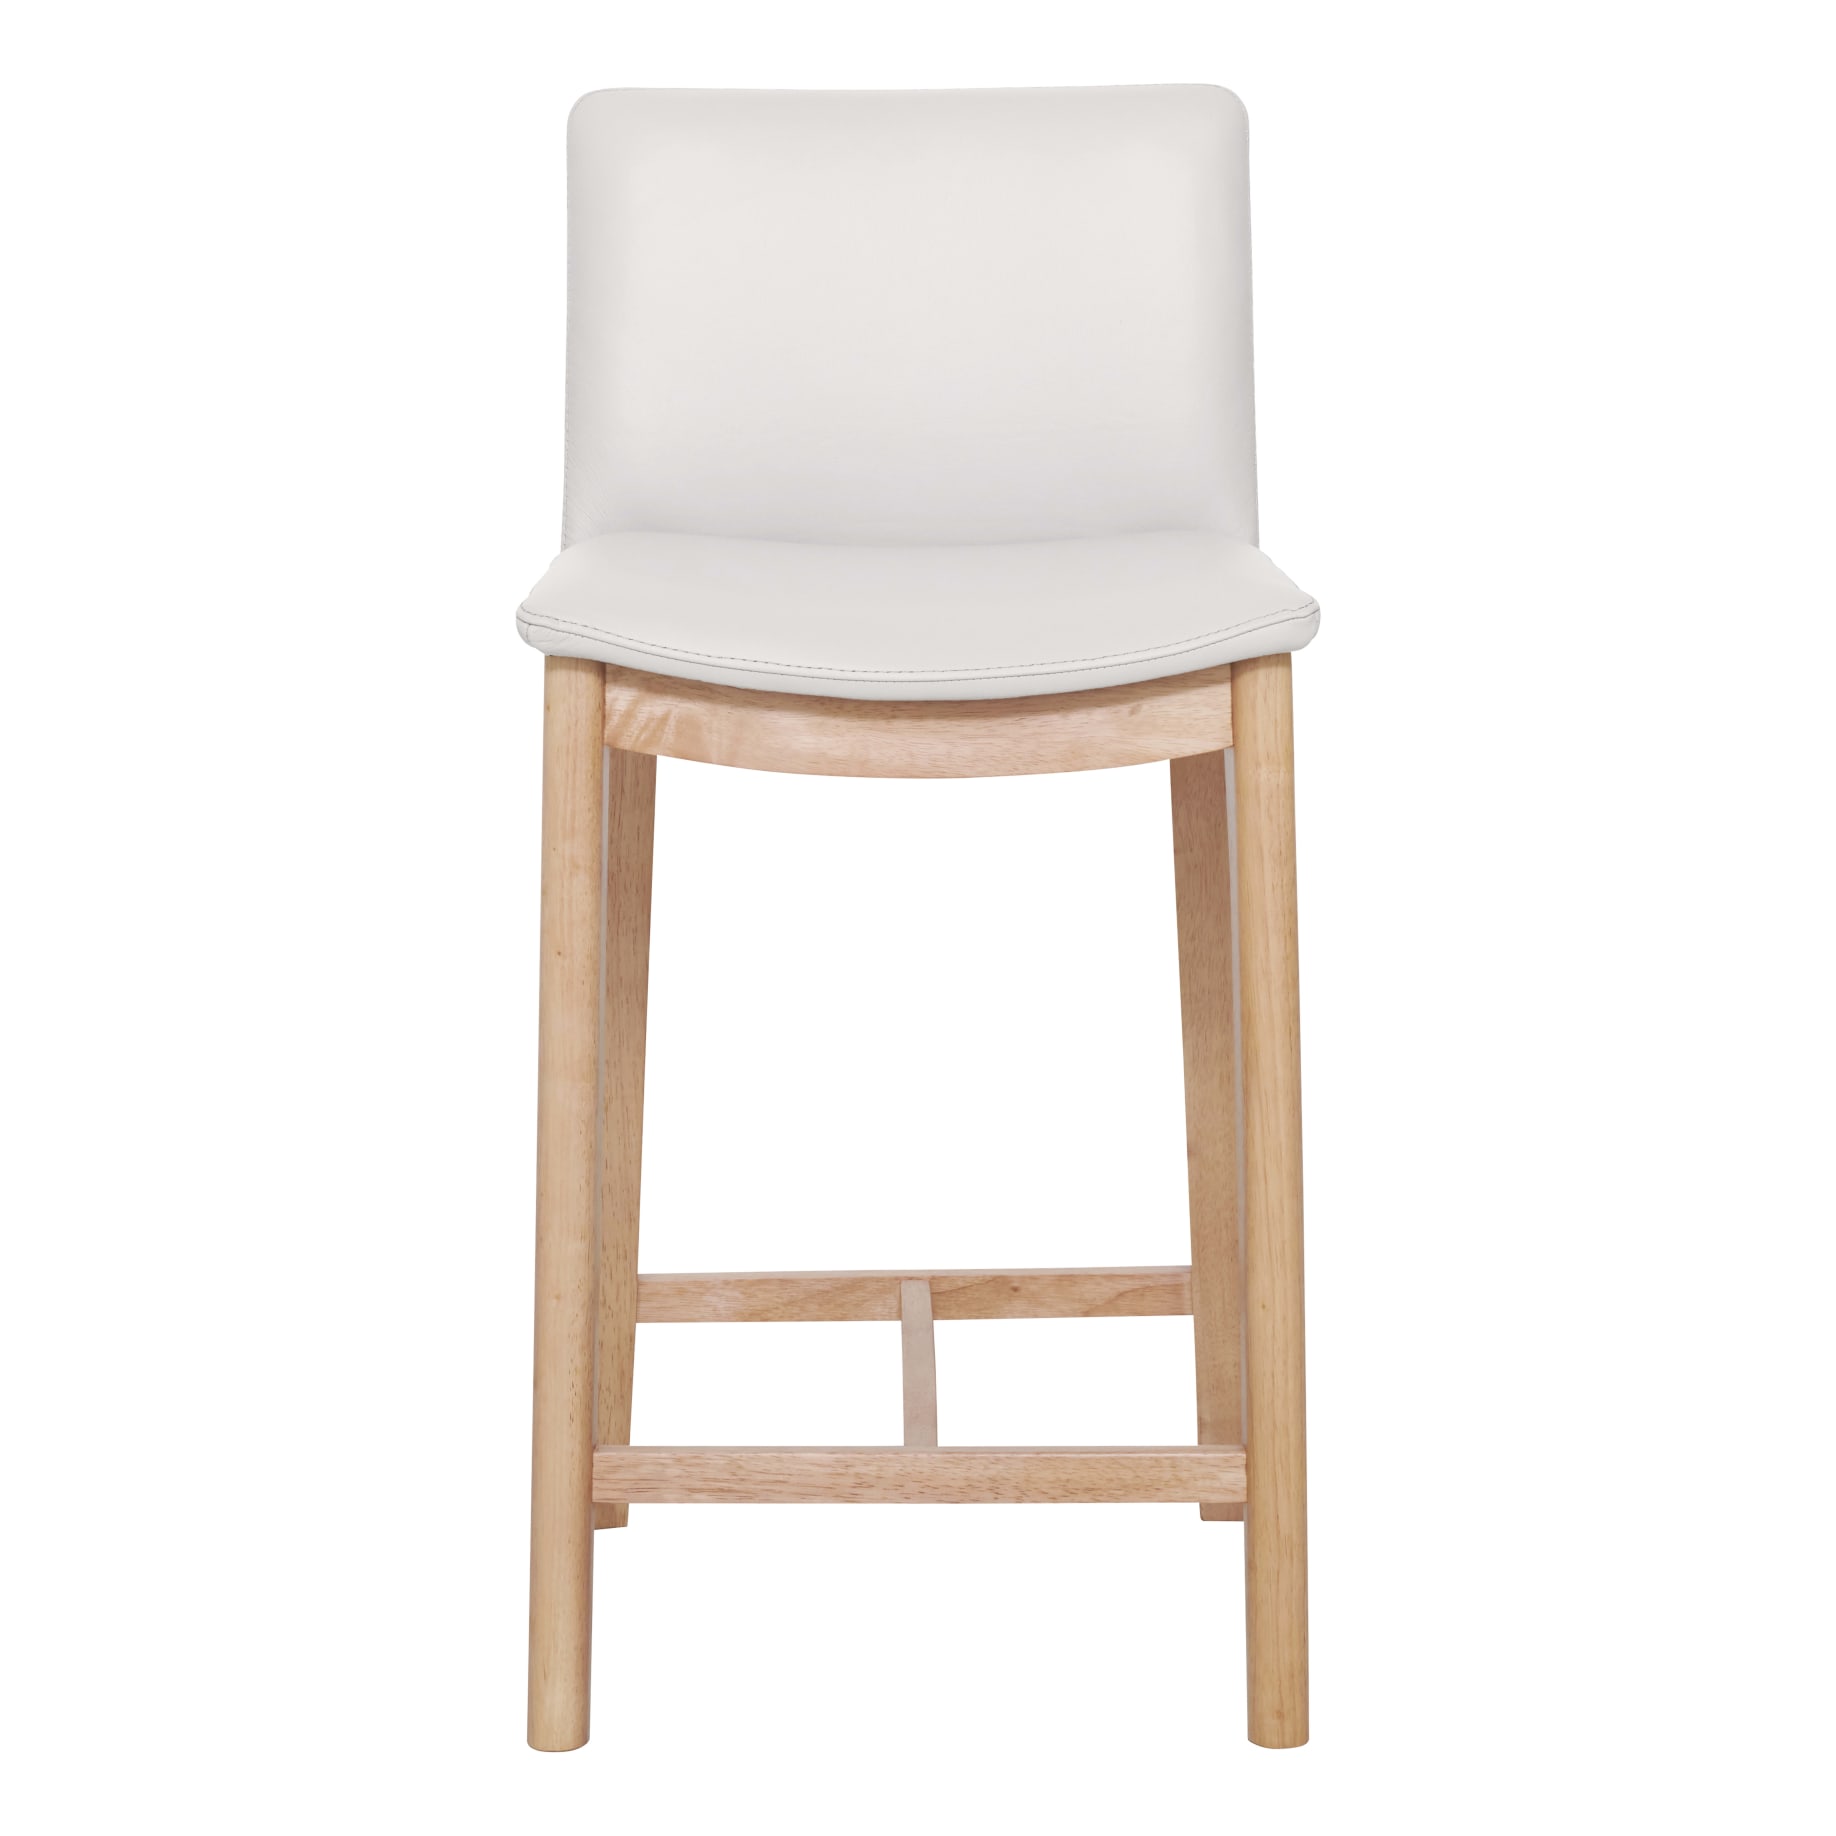 Everest Bar Chair in Leather White / Oak Stain